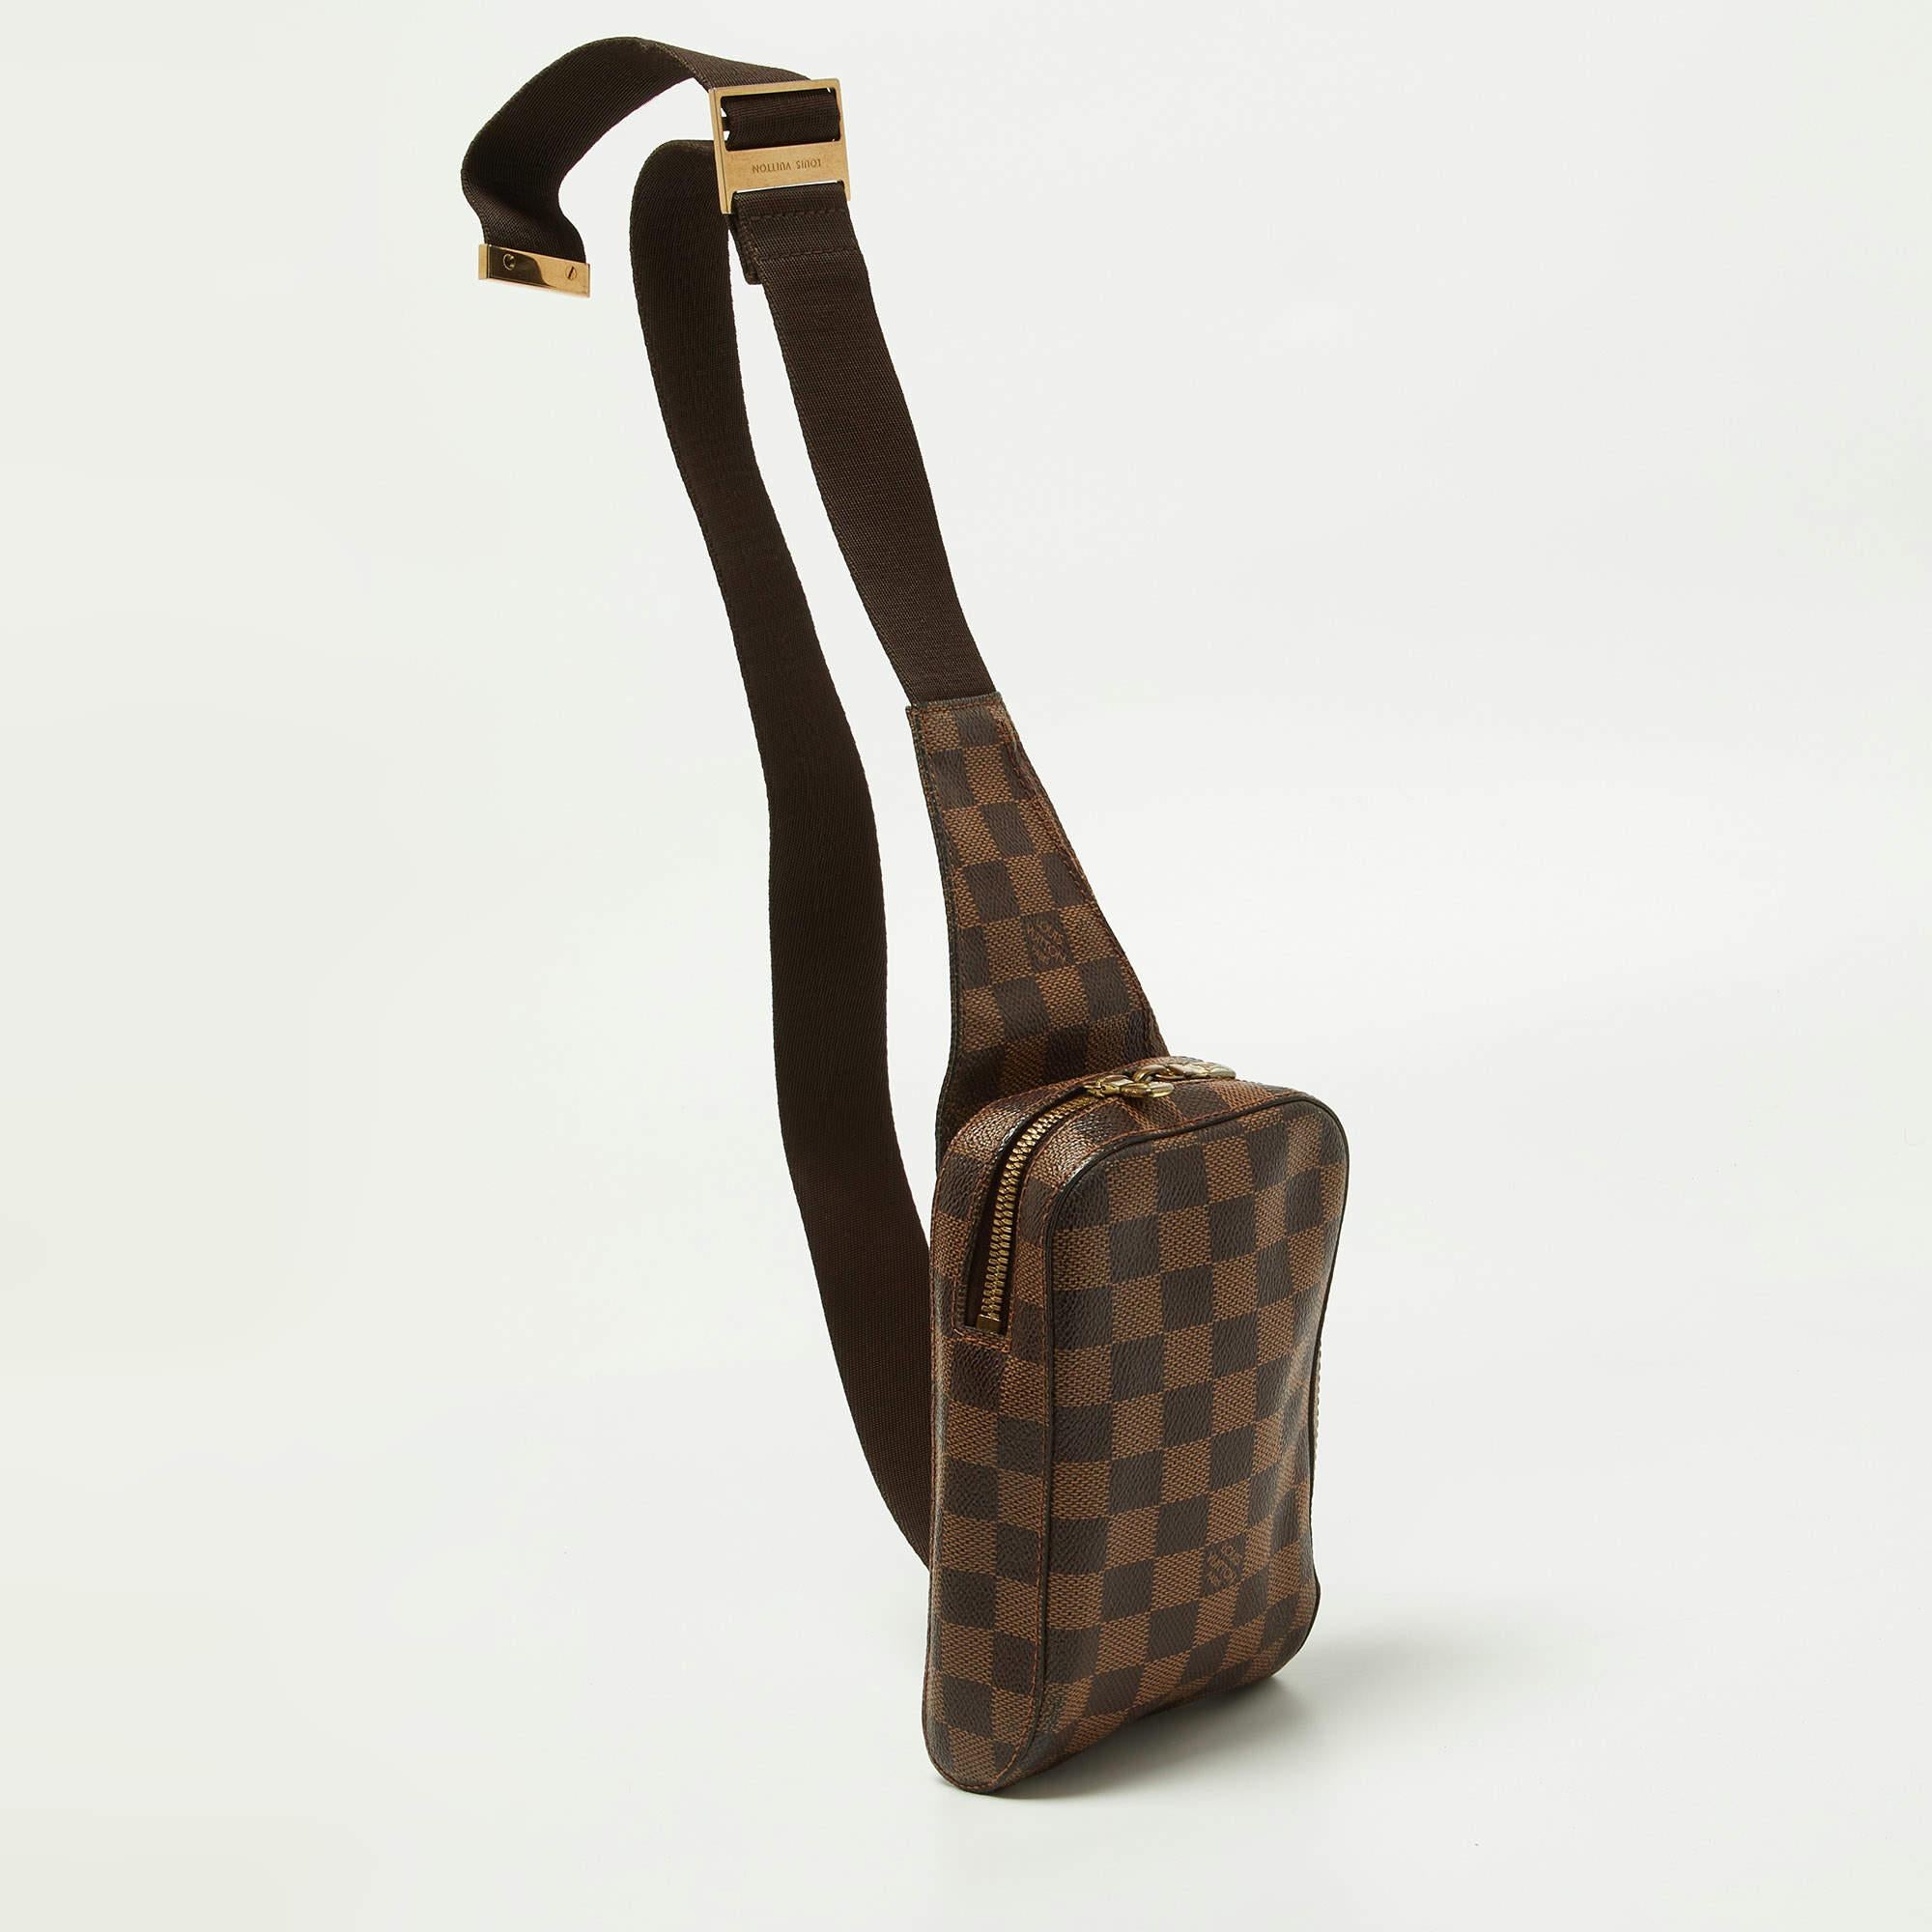 This LV accessory is an example of the brand's fine designs that are skillfully crafted to project a classic charm. It is a functional creation with an elevating appeal.

